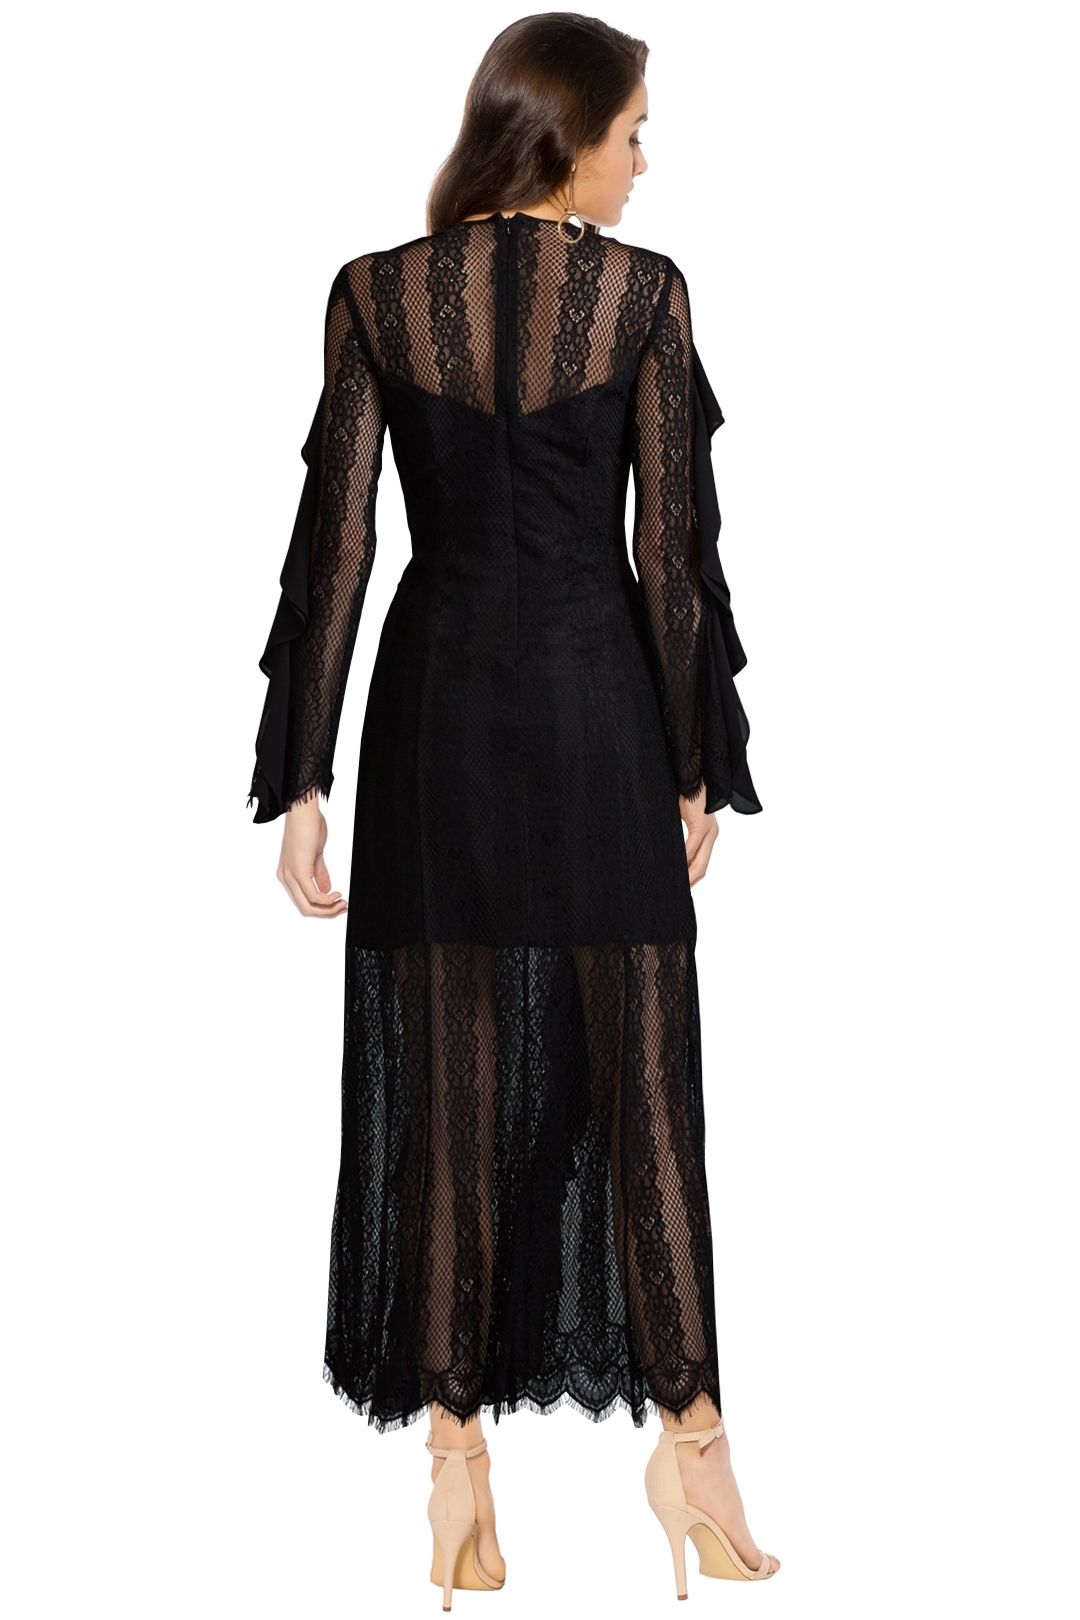 Keepsake The Label - Better Days Lace Gown - Black - Back